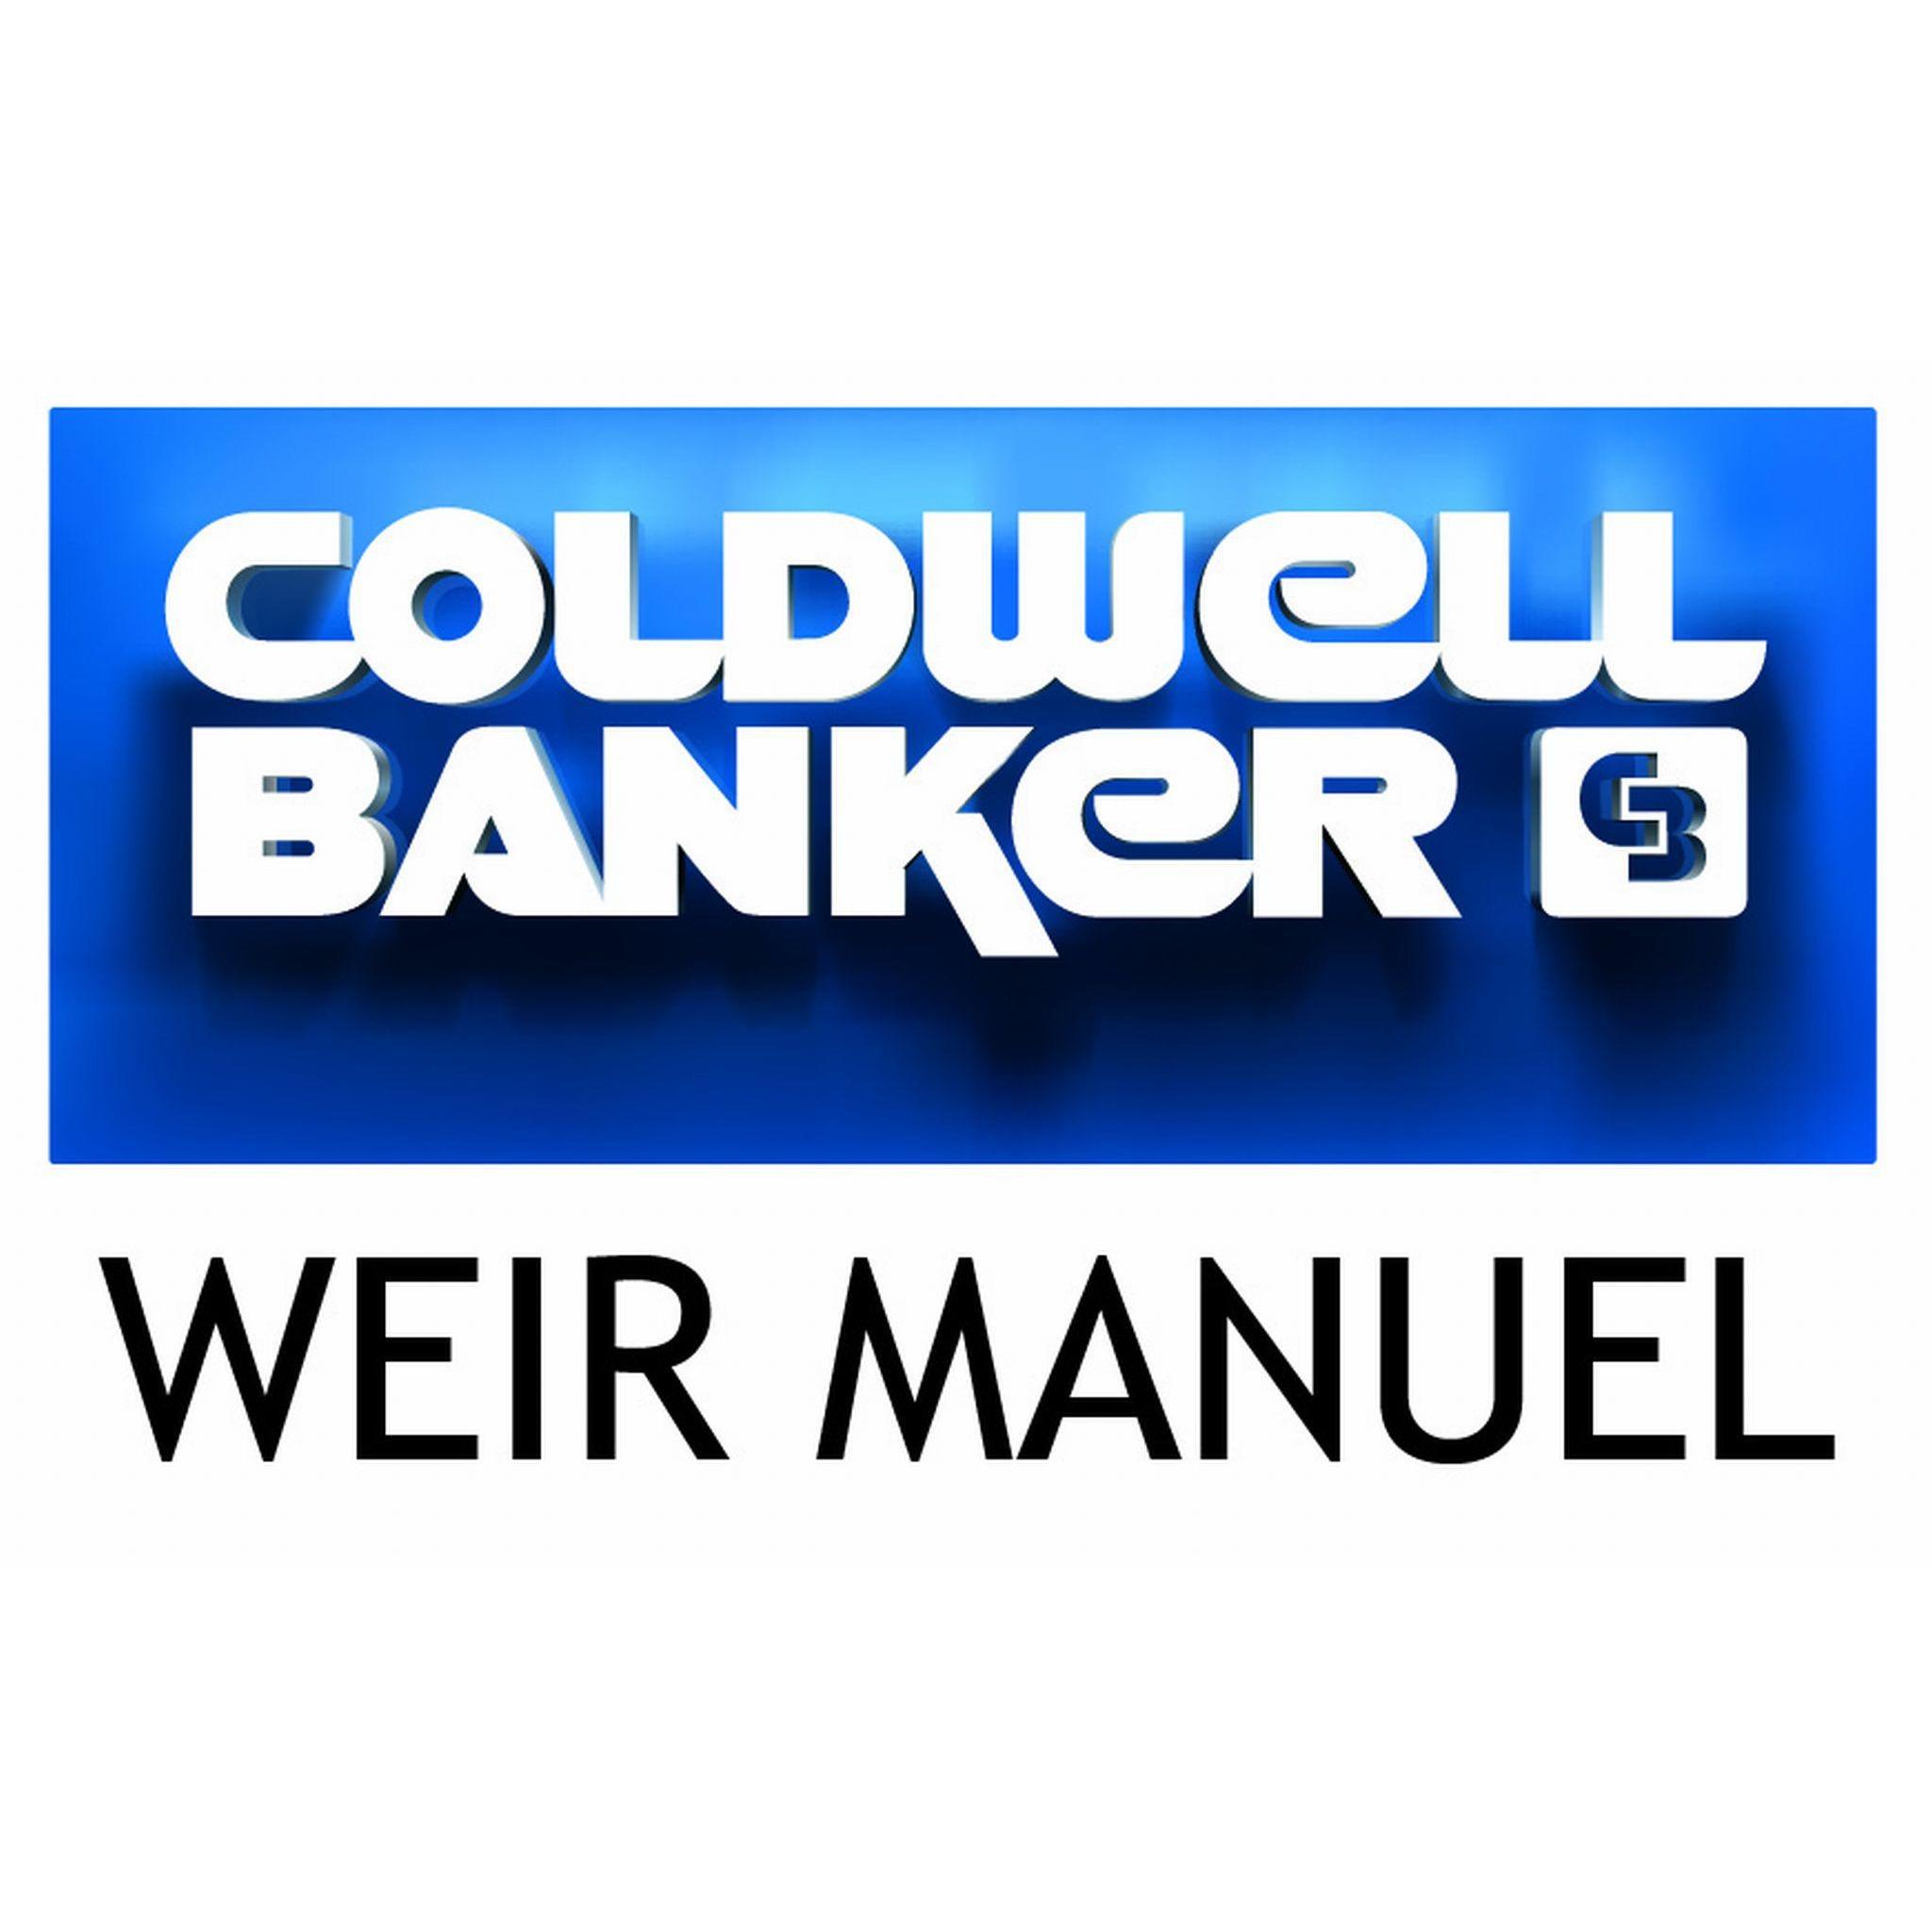 Holly Drouin | Coldwell Banker Weir Manuel